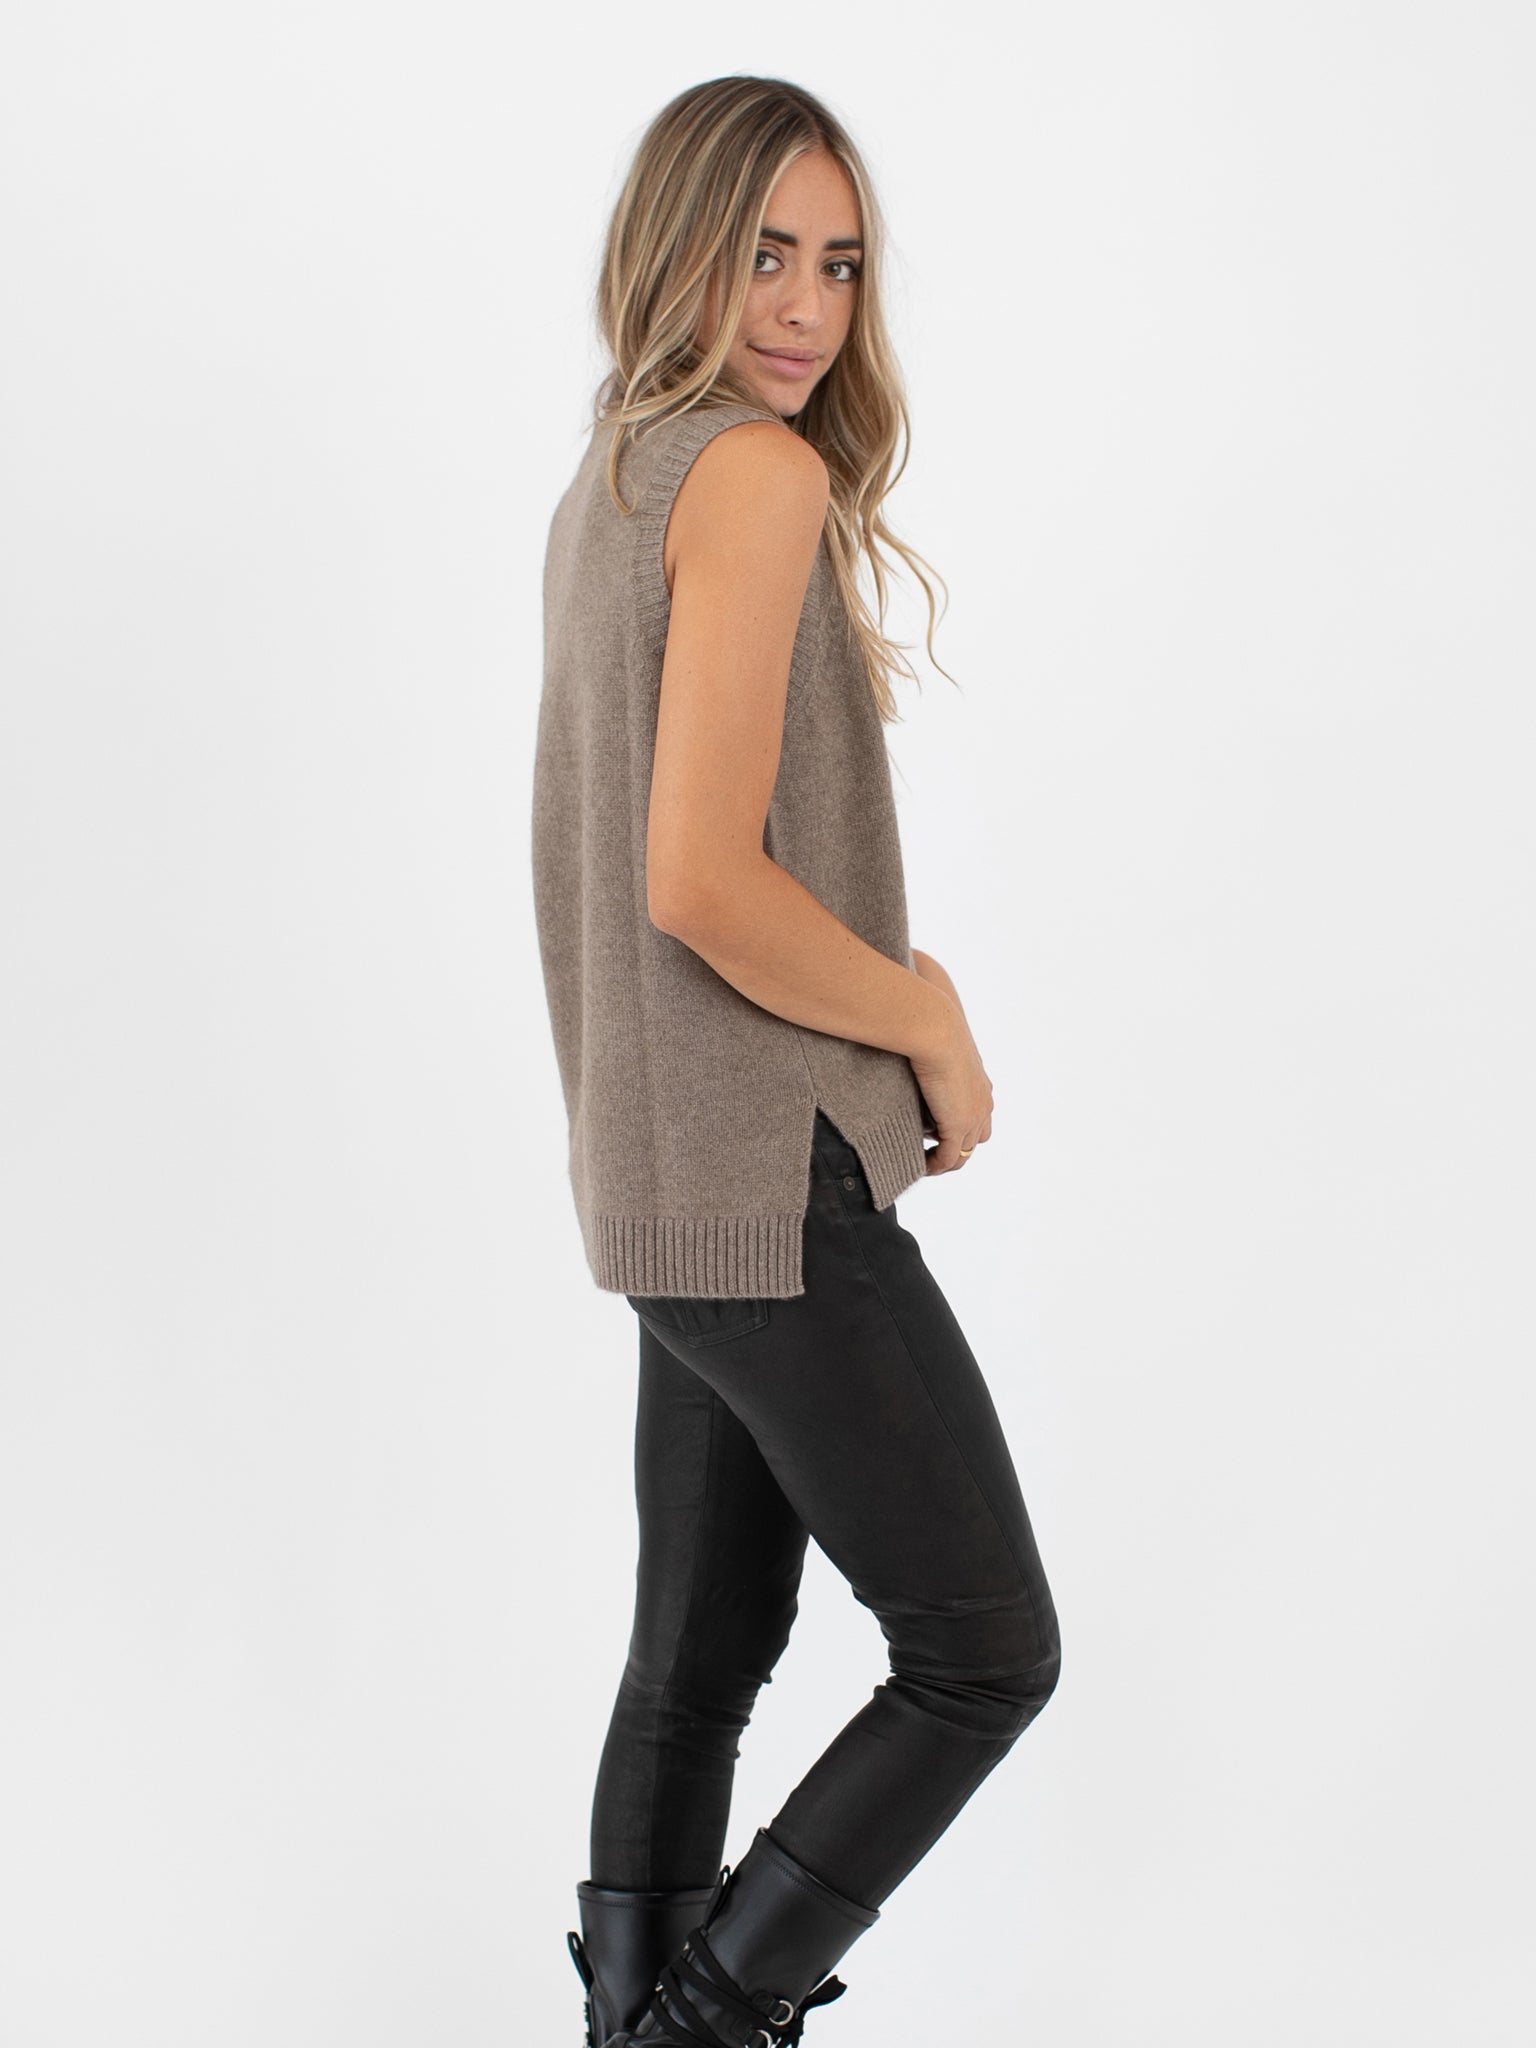 Sleeveless Cashmere Sweater Top with High-Low Hem